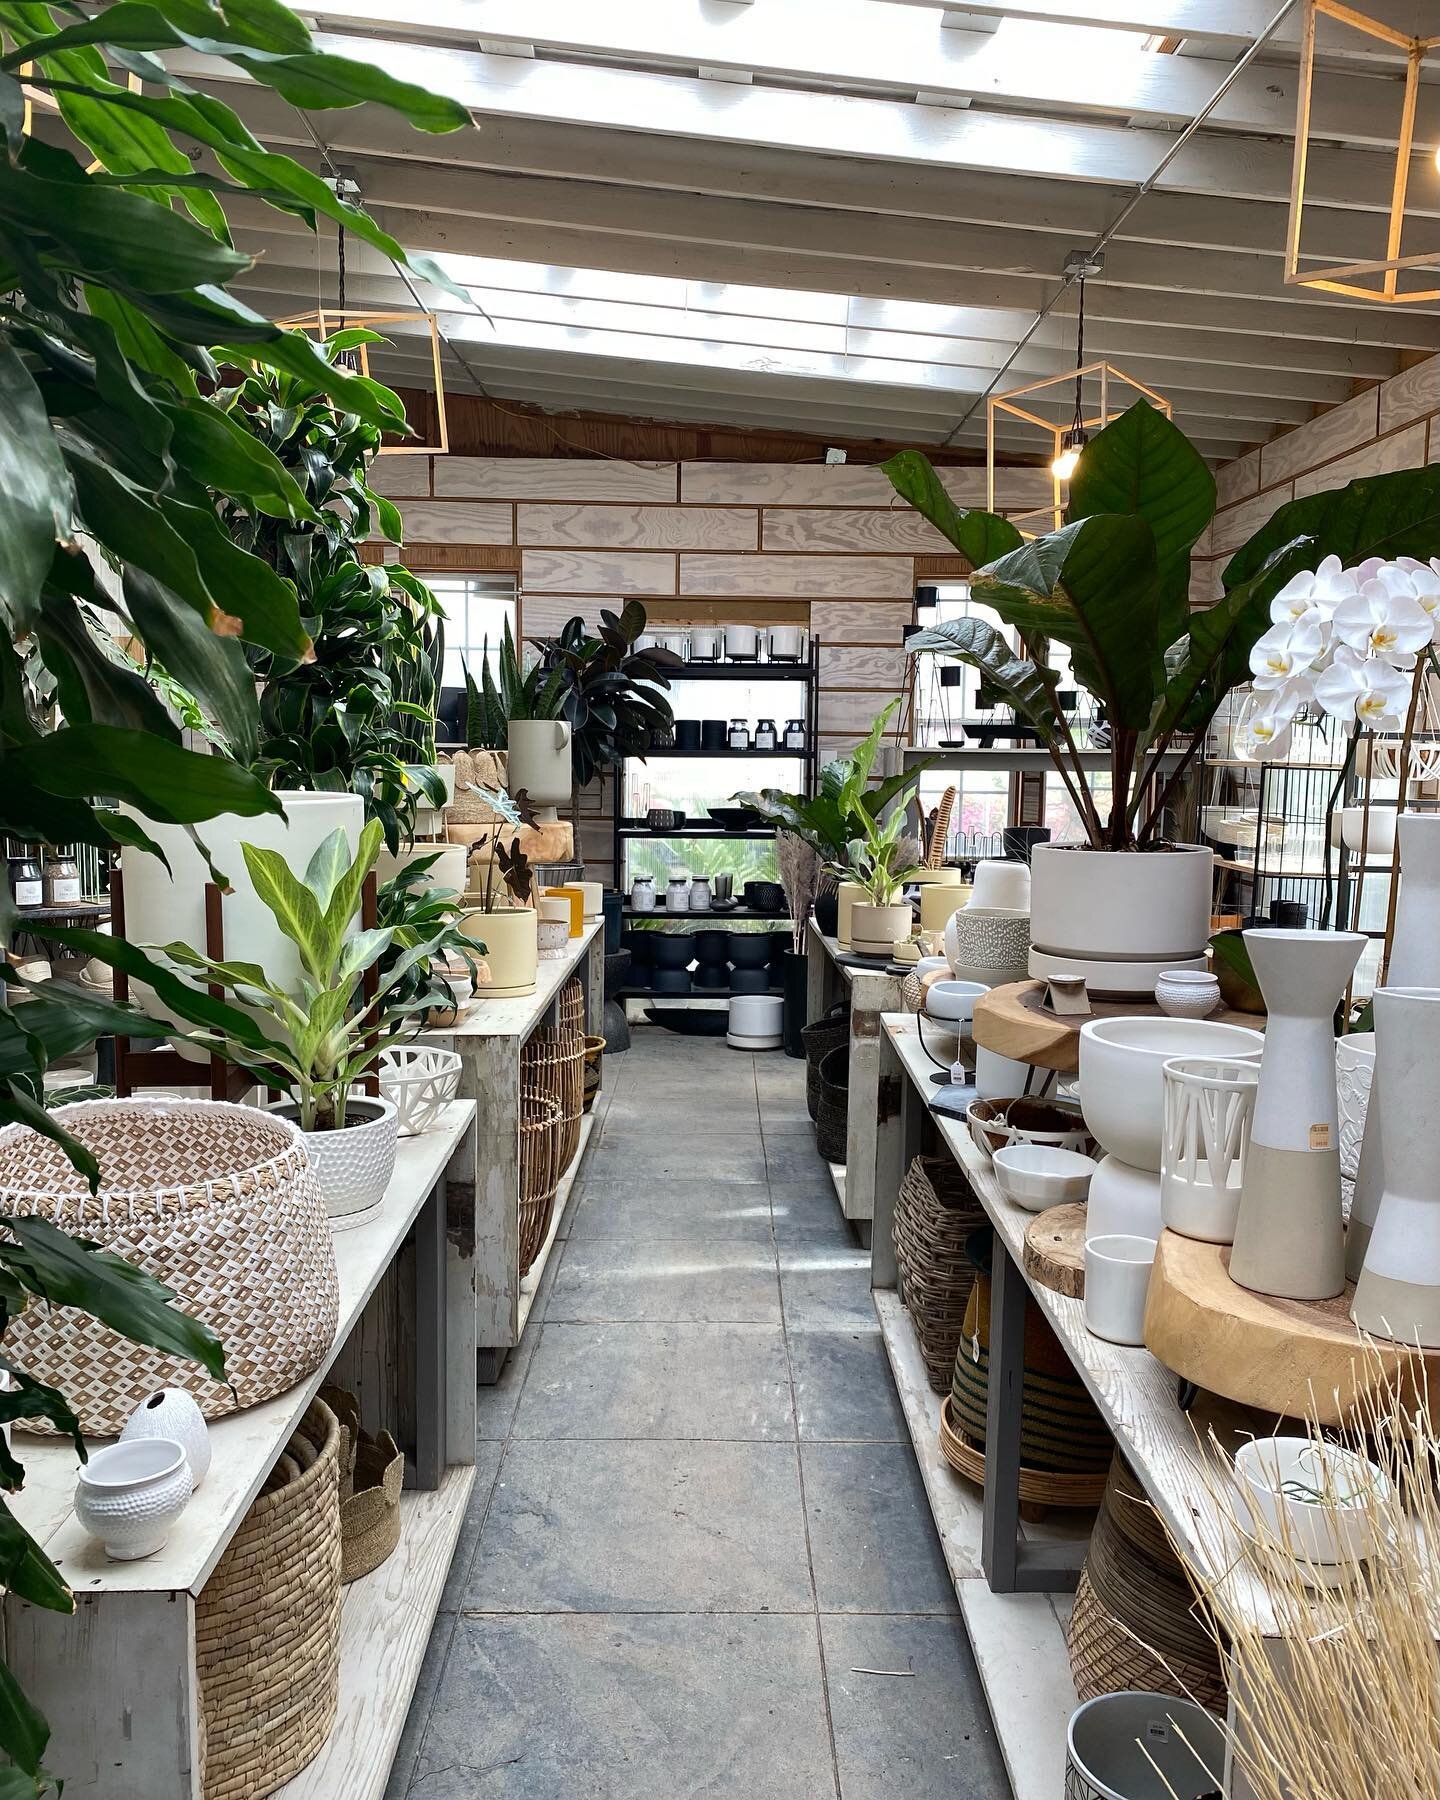 * * S A L E * * Thursday thru Saturday (7/8-7/10) we are having a 20% off sale on all houseplants, succulents, pots and containers! We have a big shipment coming at the end of next week and we need some space in the greenhouse! Come out and see us!